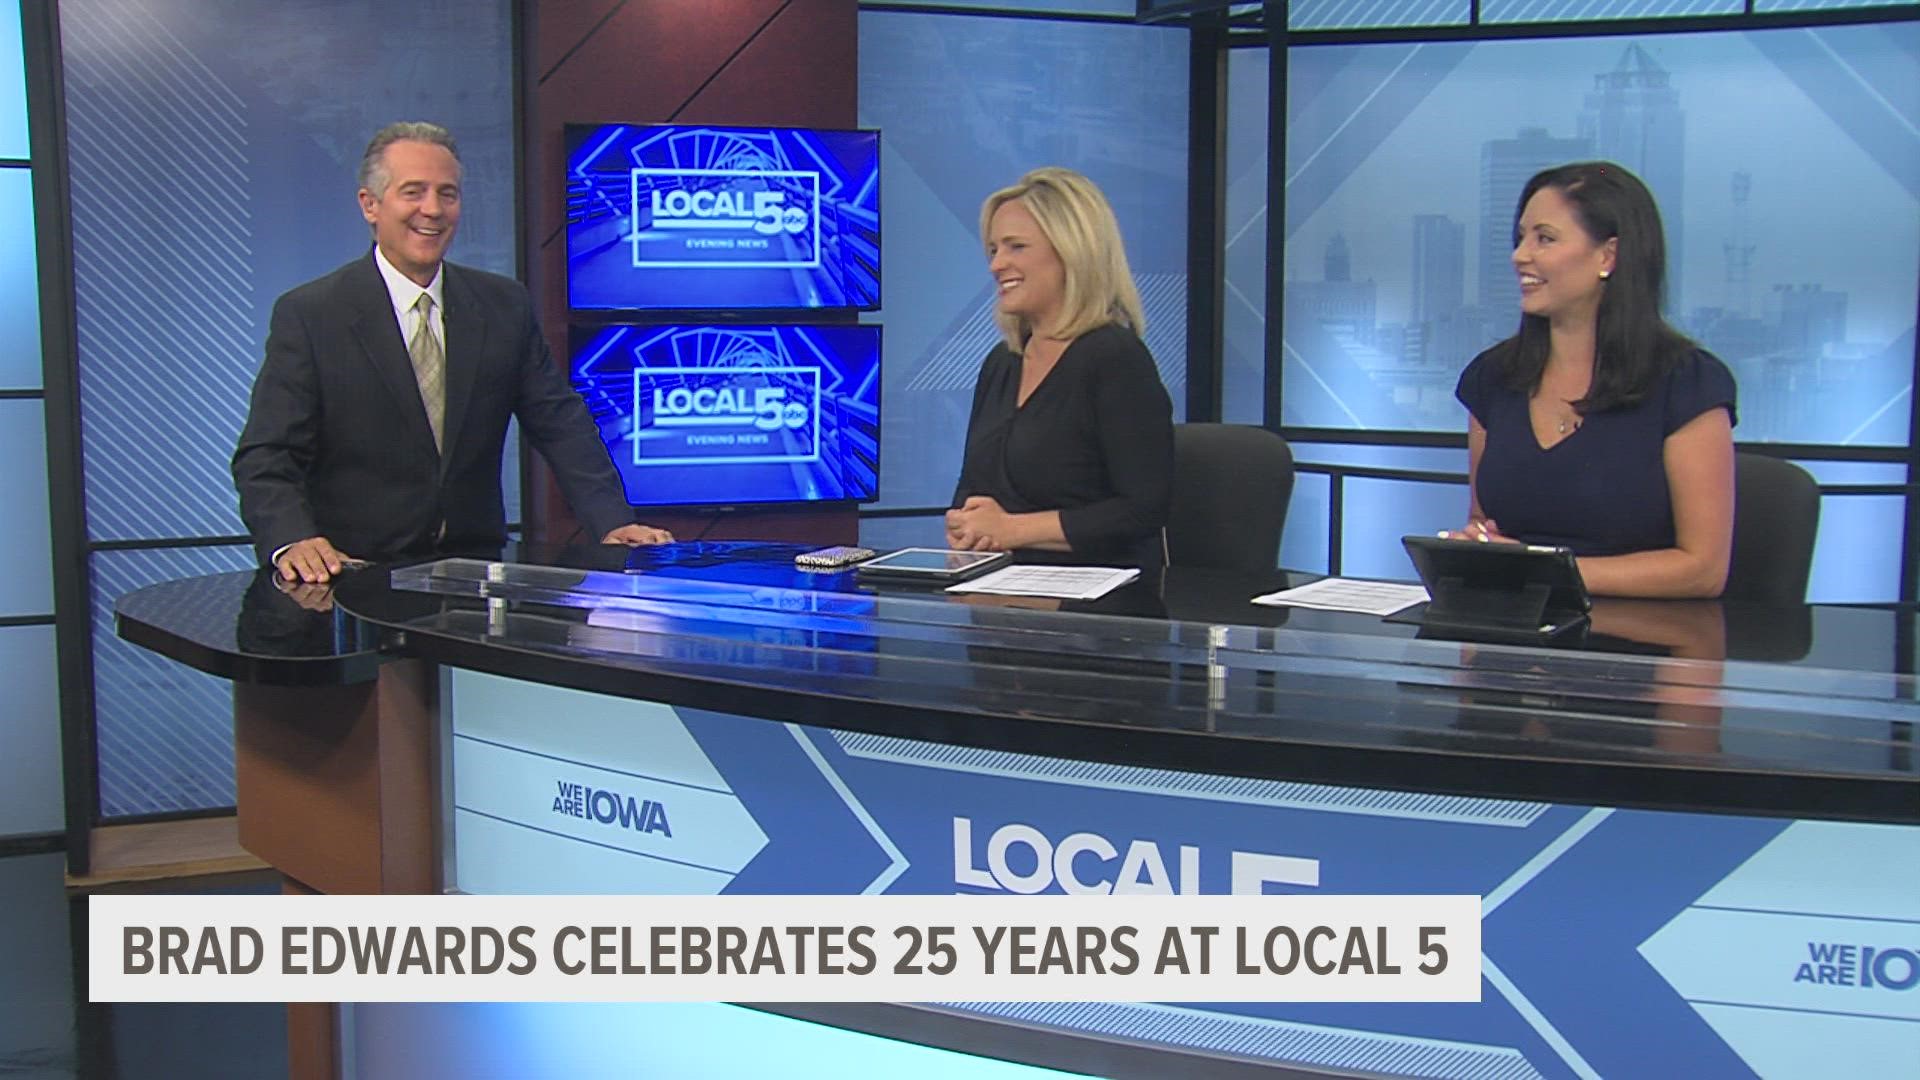 September marks Brad Edwards' 25th anniversary with Local 5 News.